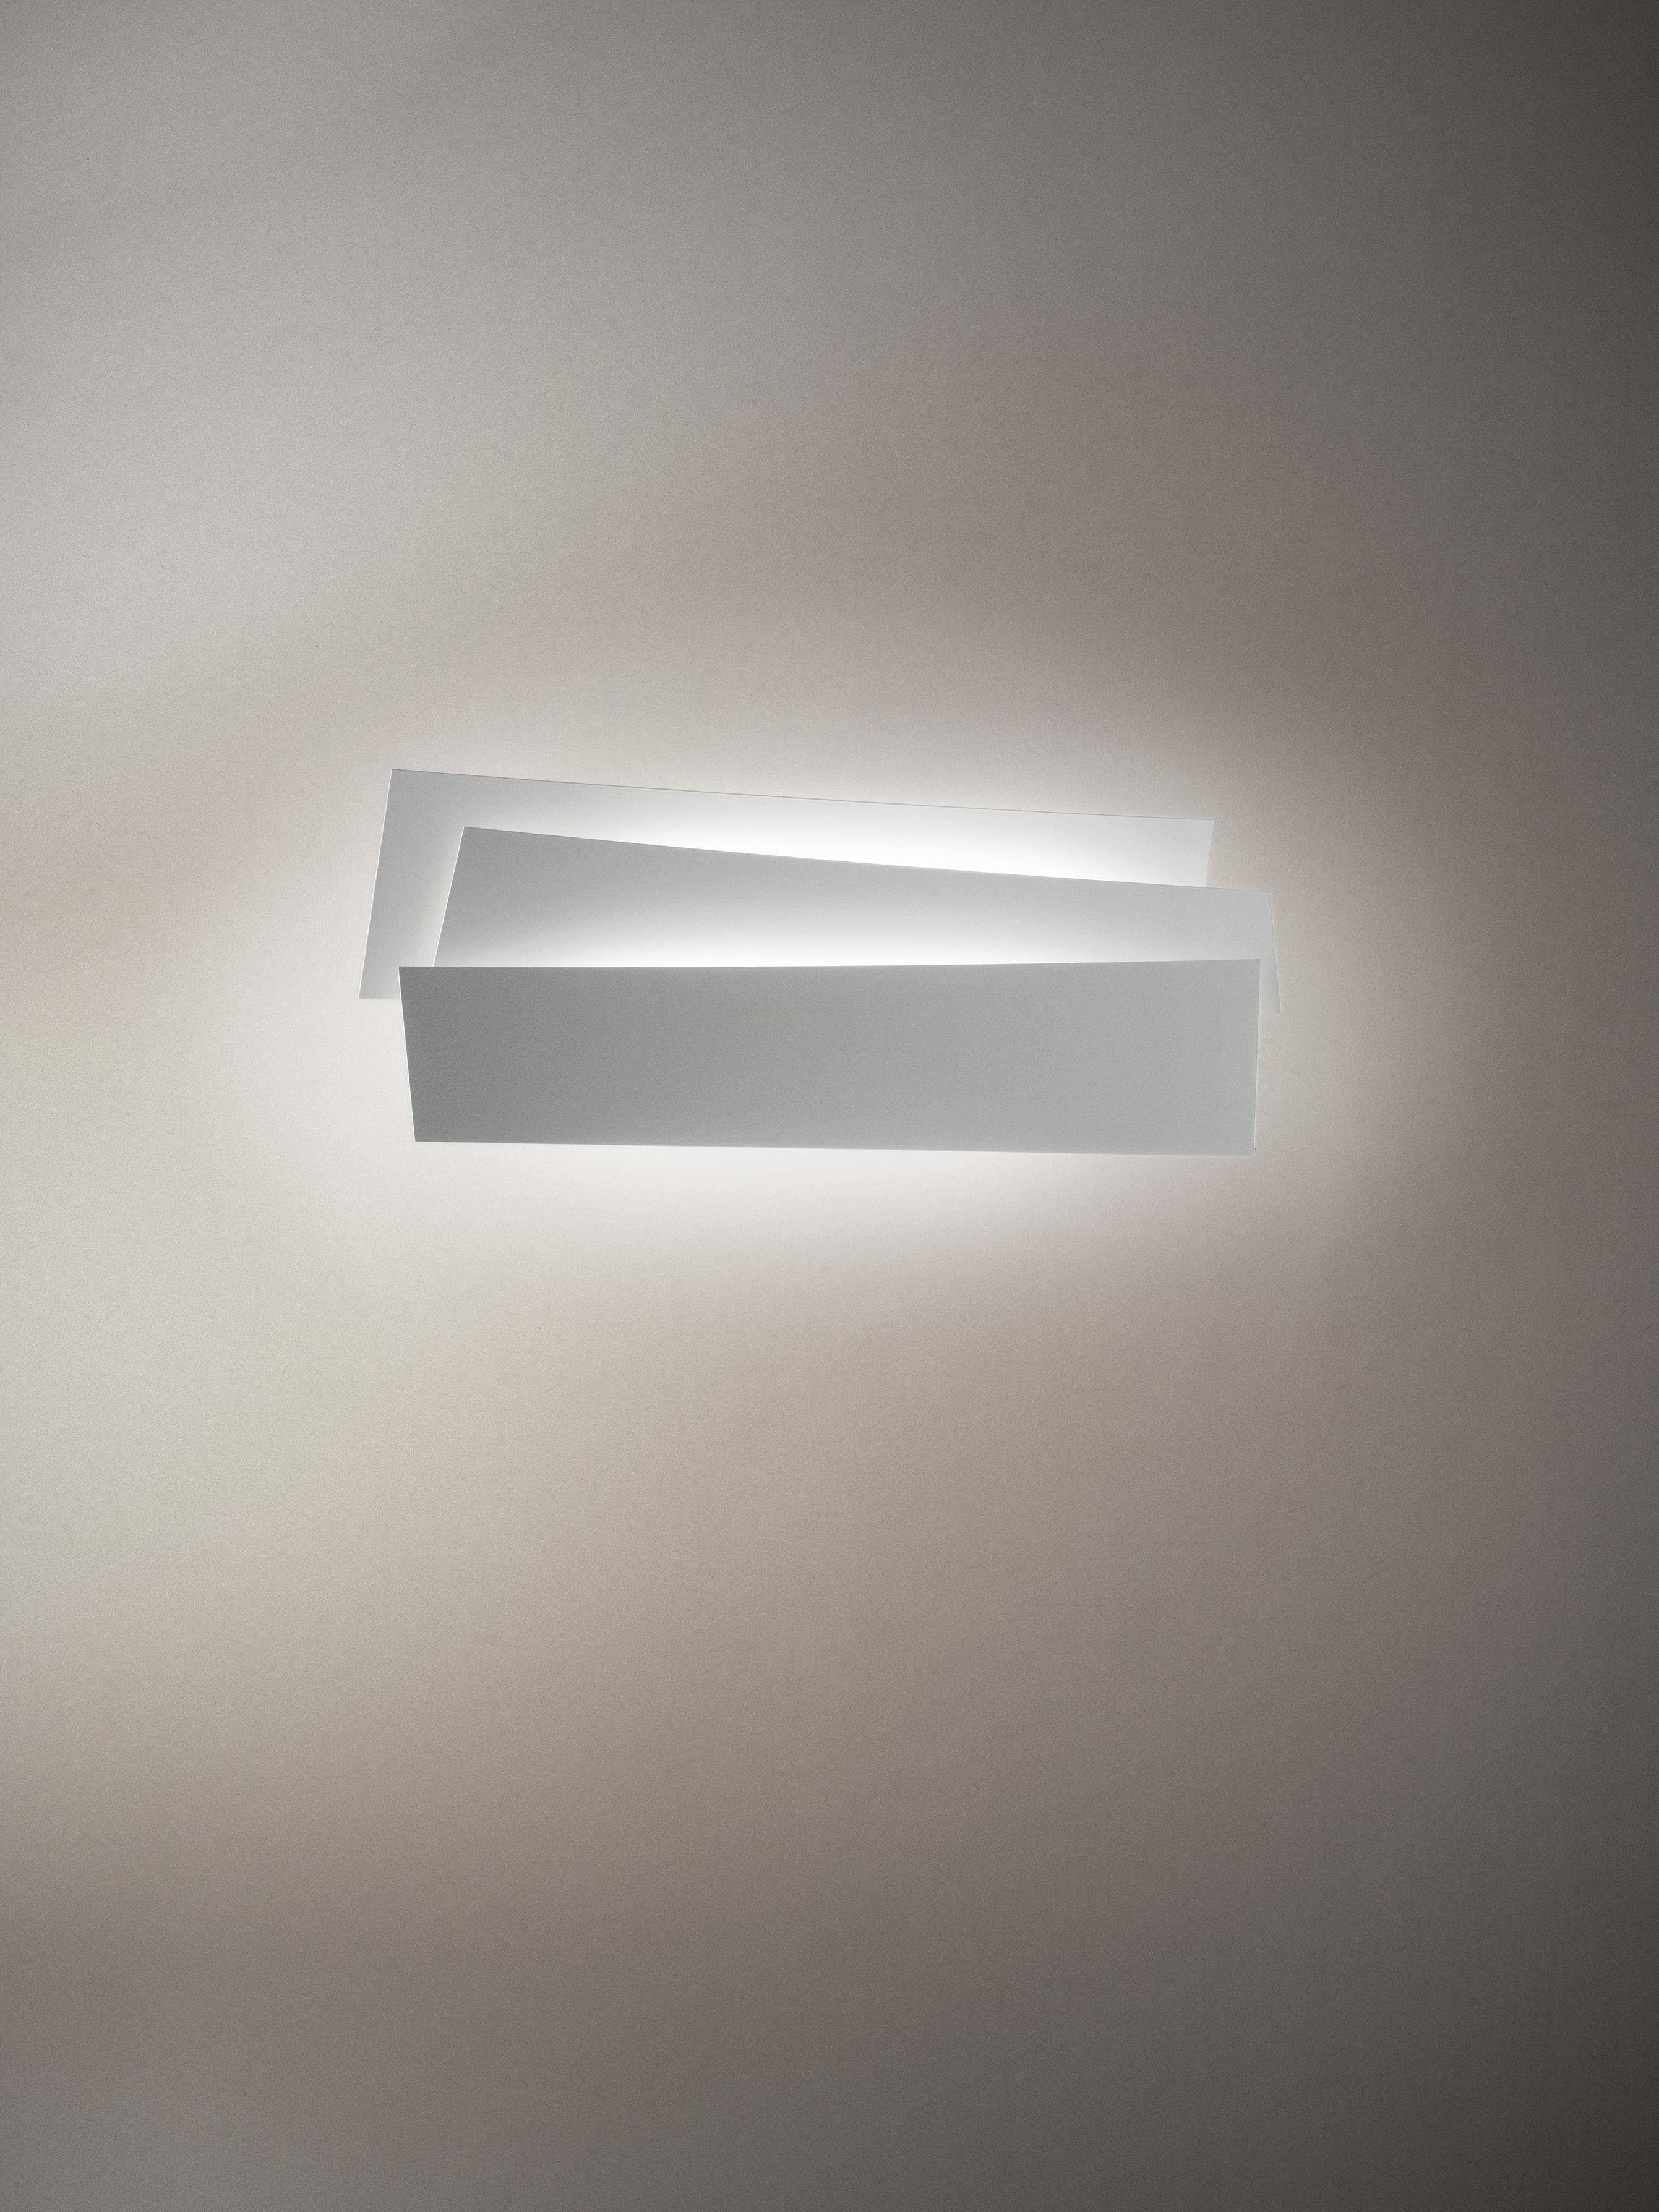 Wall lamp with reflected and diffused light. The translucent polycarbonate wall fitting acts both as the housing for the lighting technology part as well as a support for the three steel blades, which diffuser in curvature and size. The steel slabs